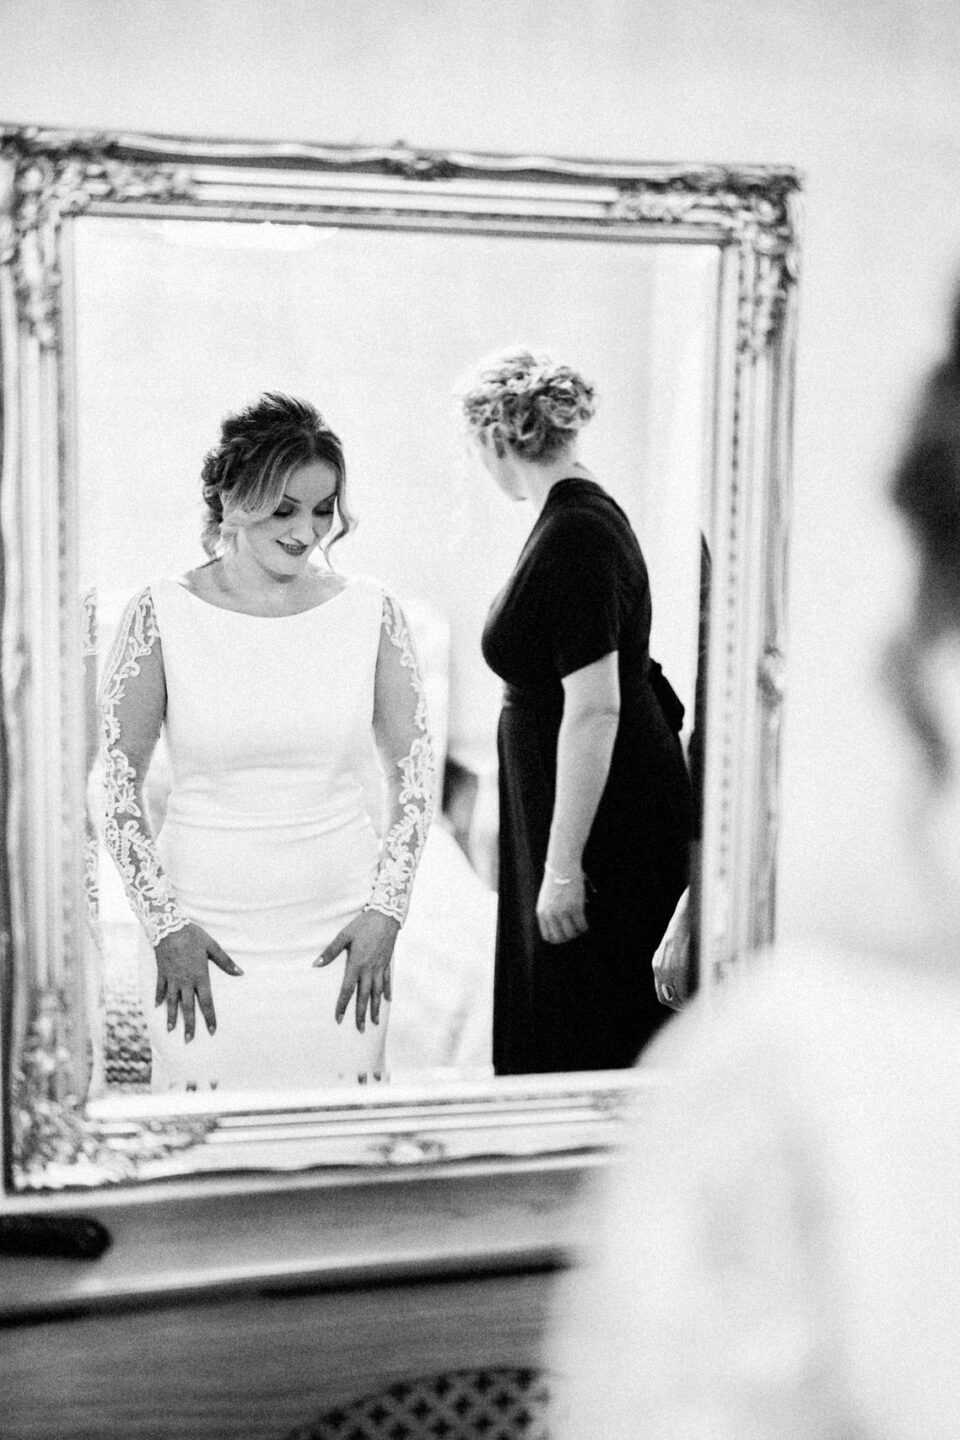 A bride is preparing herself while looking at a mirror.